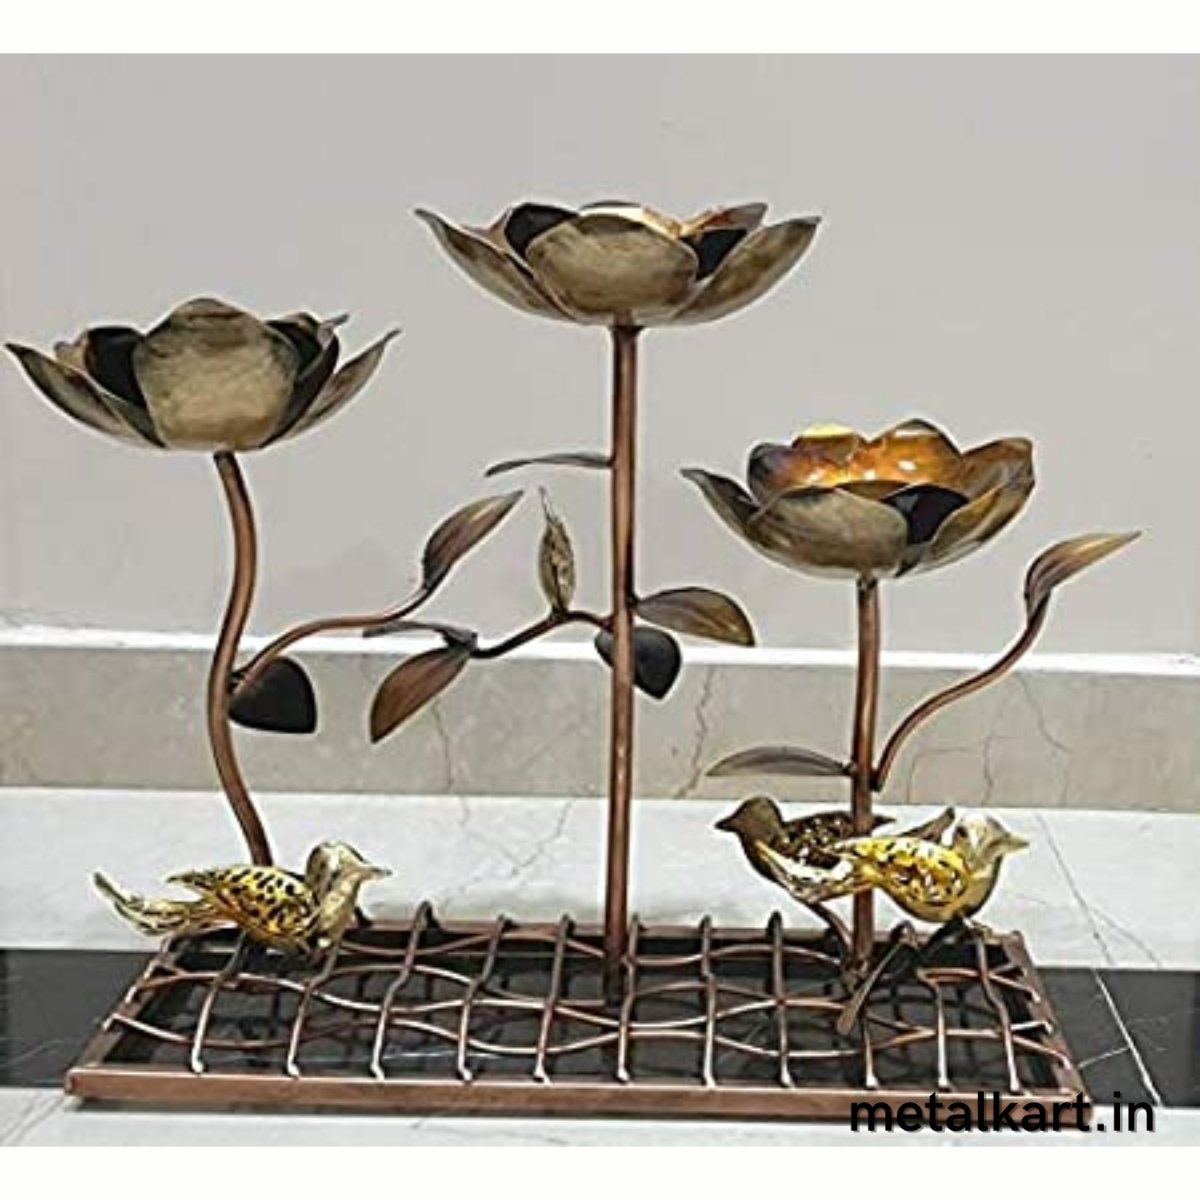 Metallic T-LITE Stand in Lotus Flower with Birds Table décor (22*8*14 Inches)